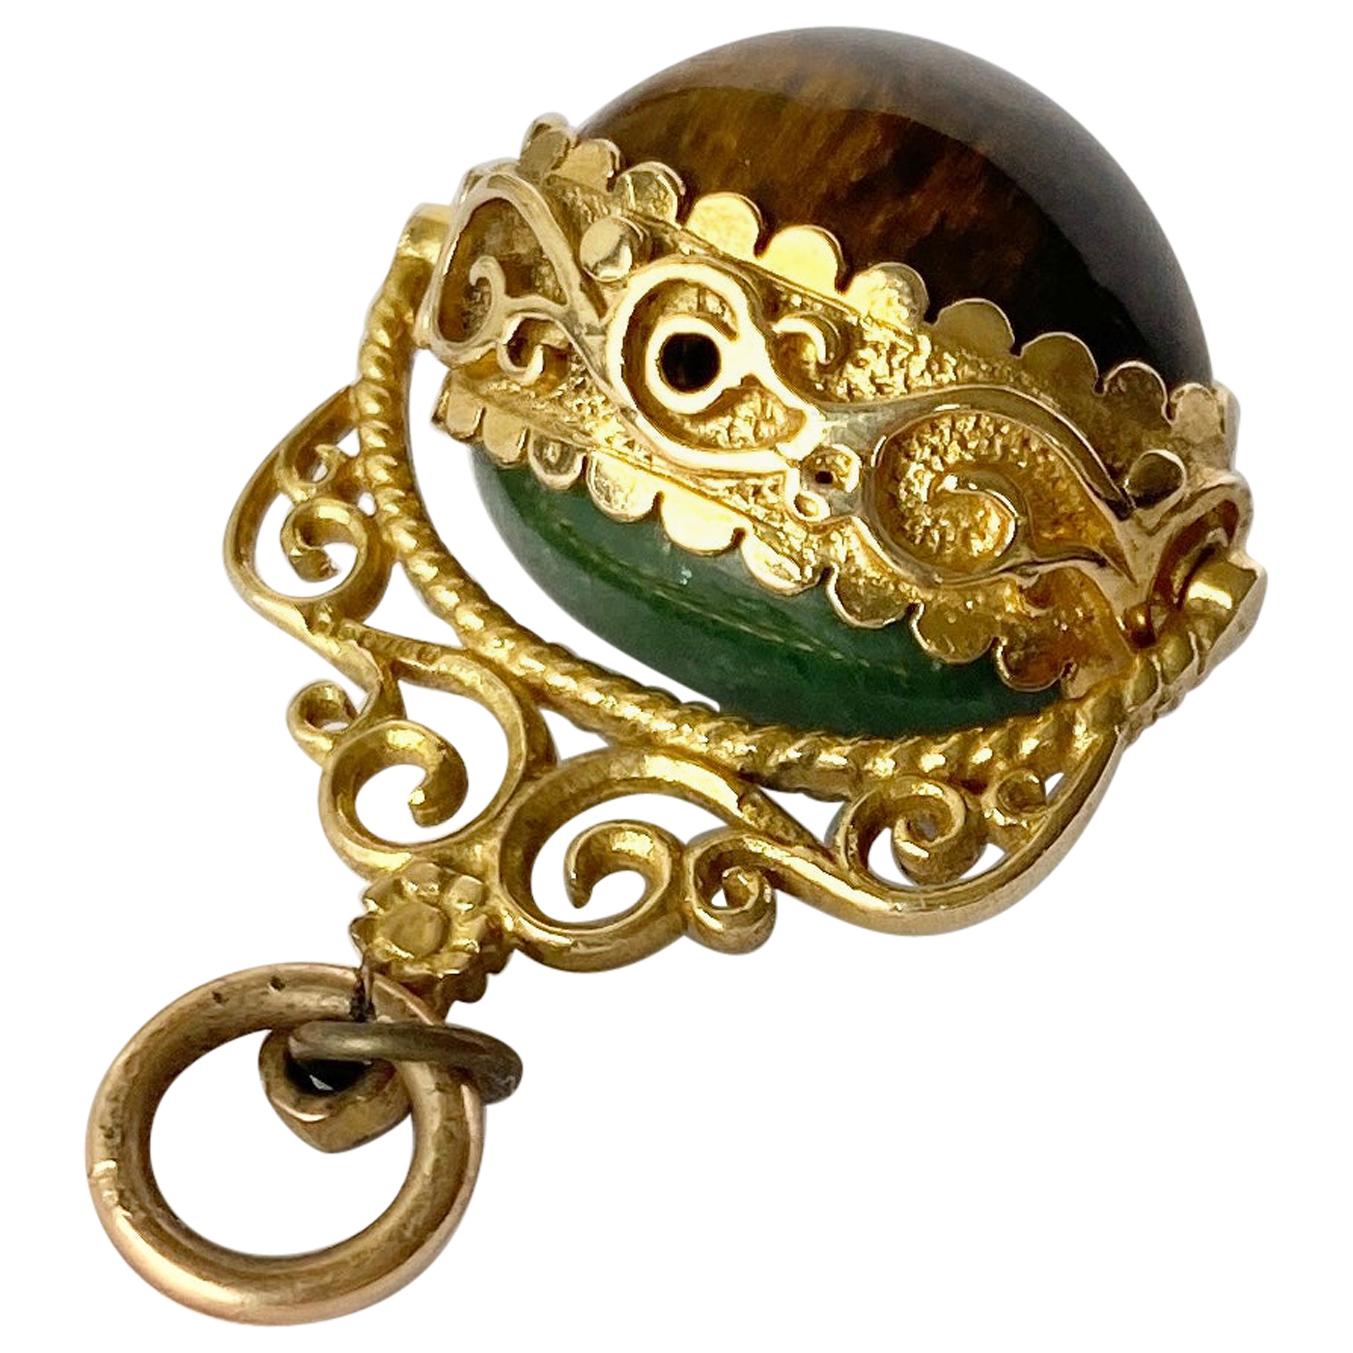 Antique Cats-Eye and Jadeite 9 Carat Gold Fob